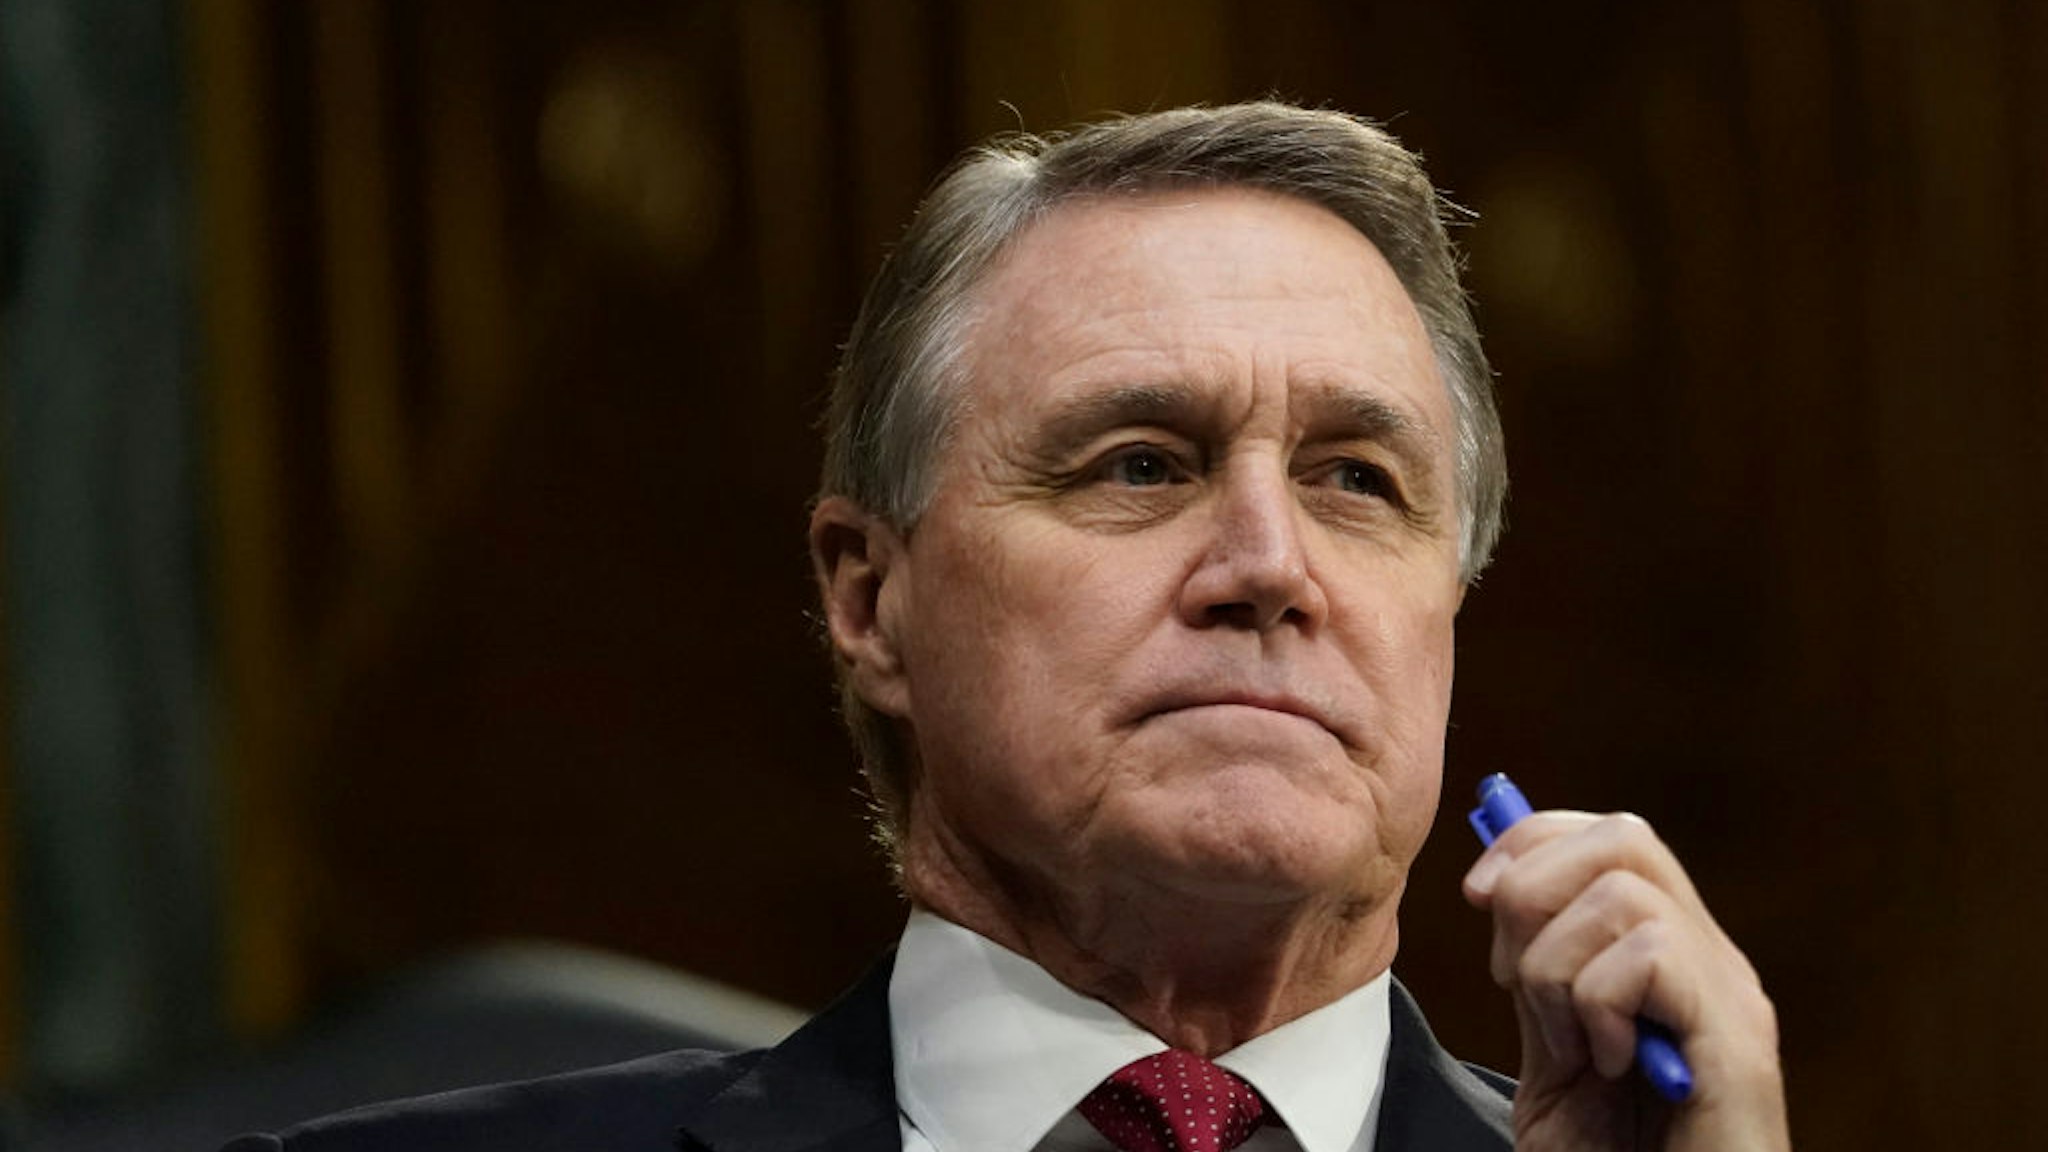 Sen. David Perdue (R-GA) attends a Senate Banking Committee hearing on Capitol Hill on September 24, 2020 in Washington, DC.